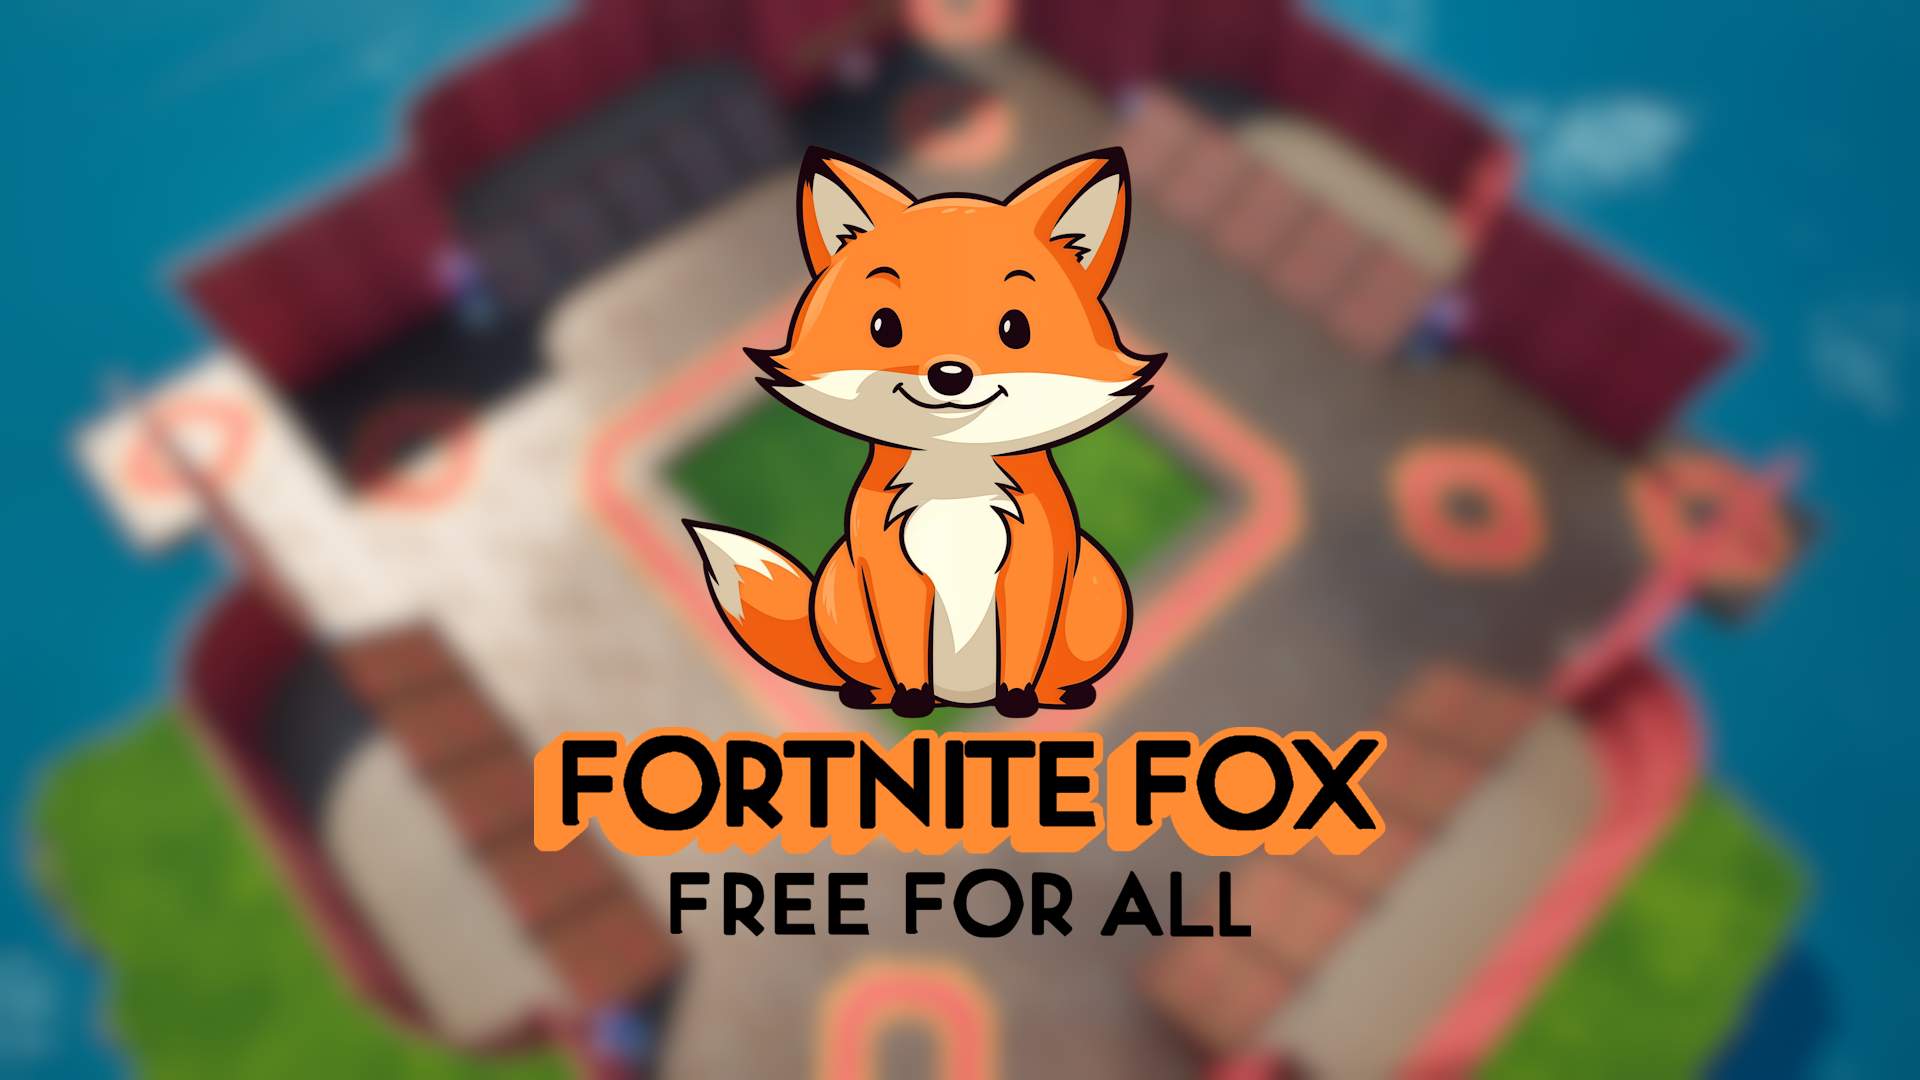 🦊Fortnite Fox - Pit Free For All